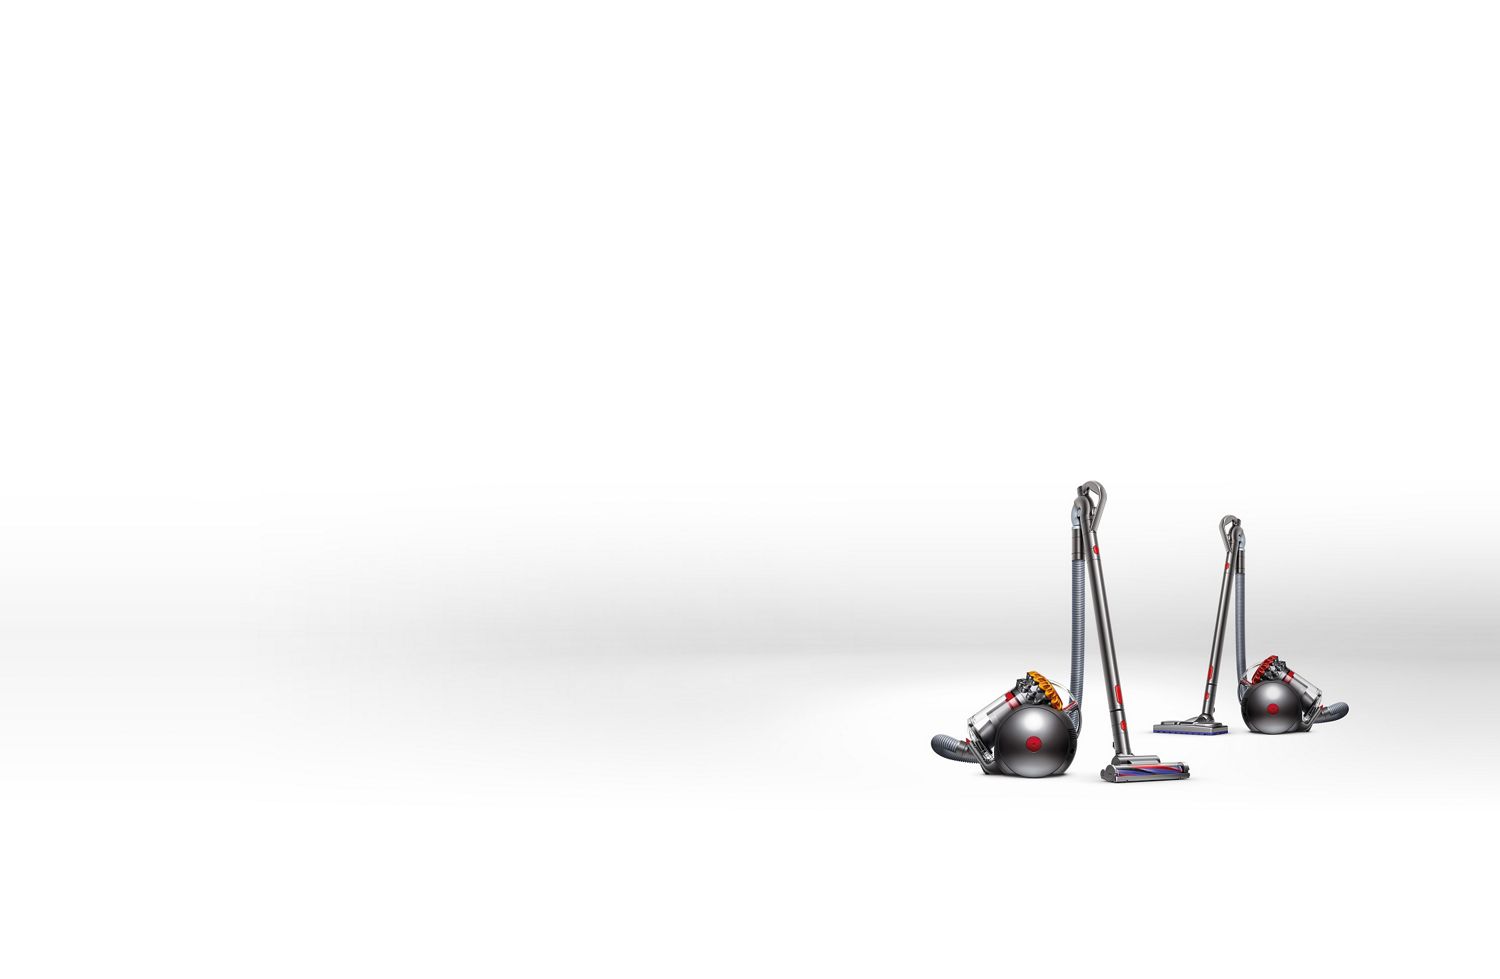 Details about   Dyson CY Big Ball Multifloor Vacuum Crevice & Dusting Brush New Quick Release 